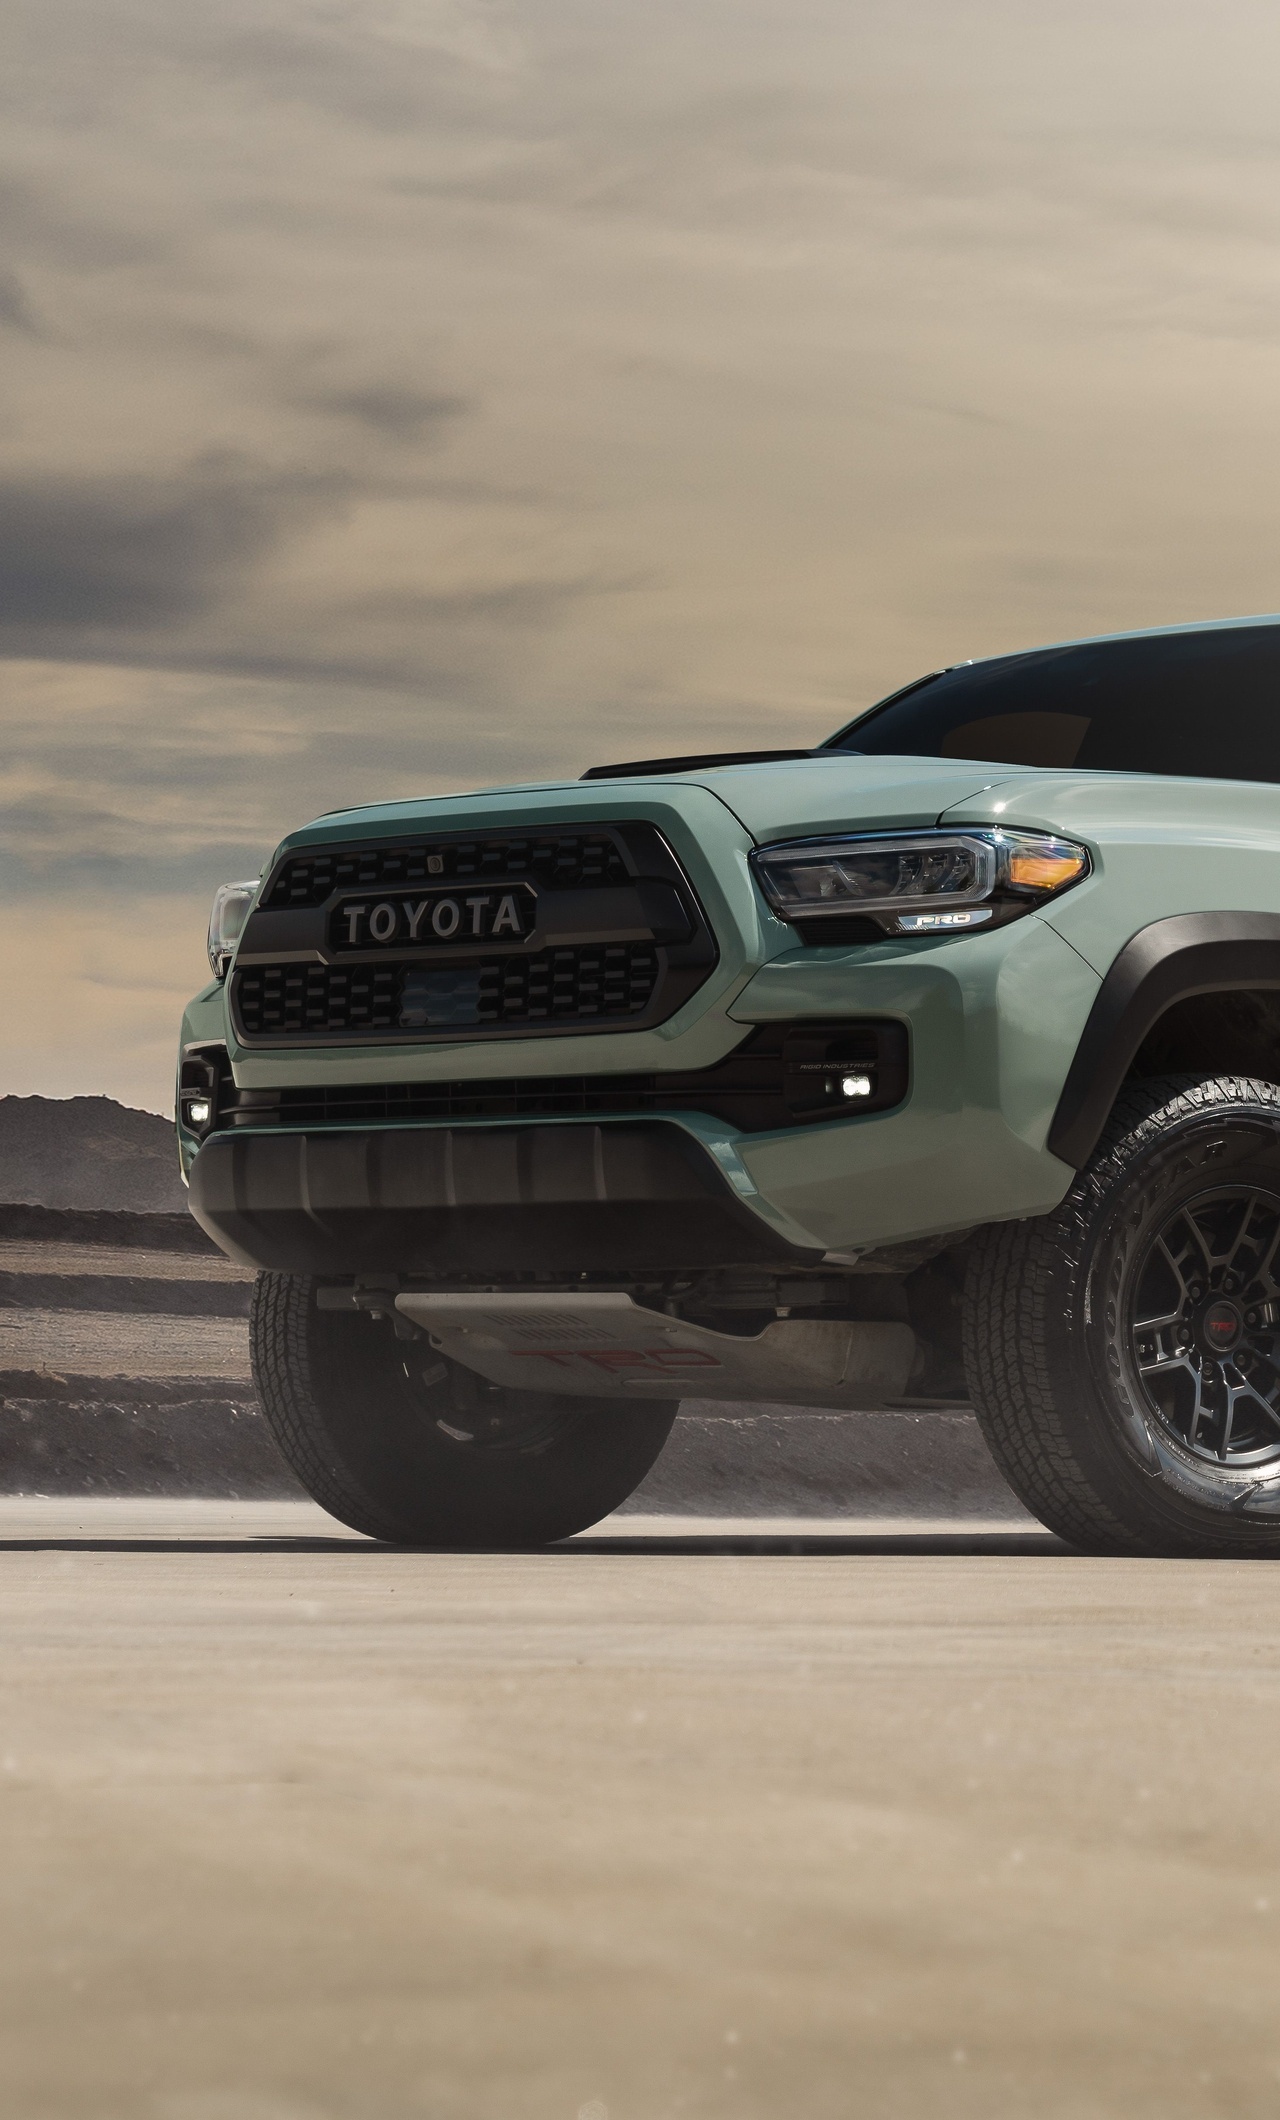 Toyota Tundra, Tacoma iPhone 6, HD wallpapers, Auto industry, 1280x2120 HD Handy